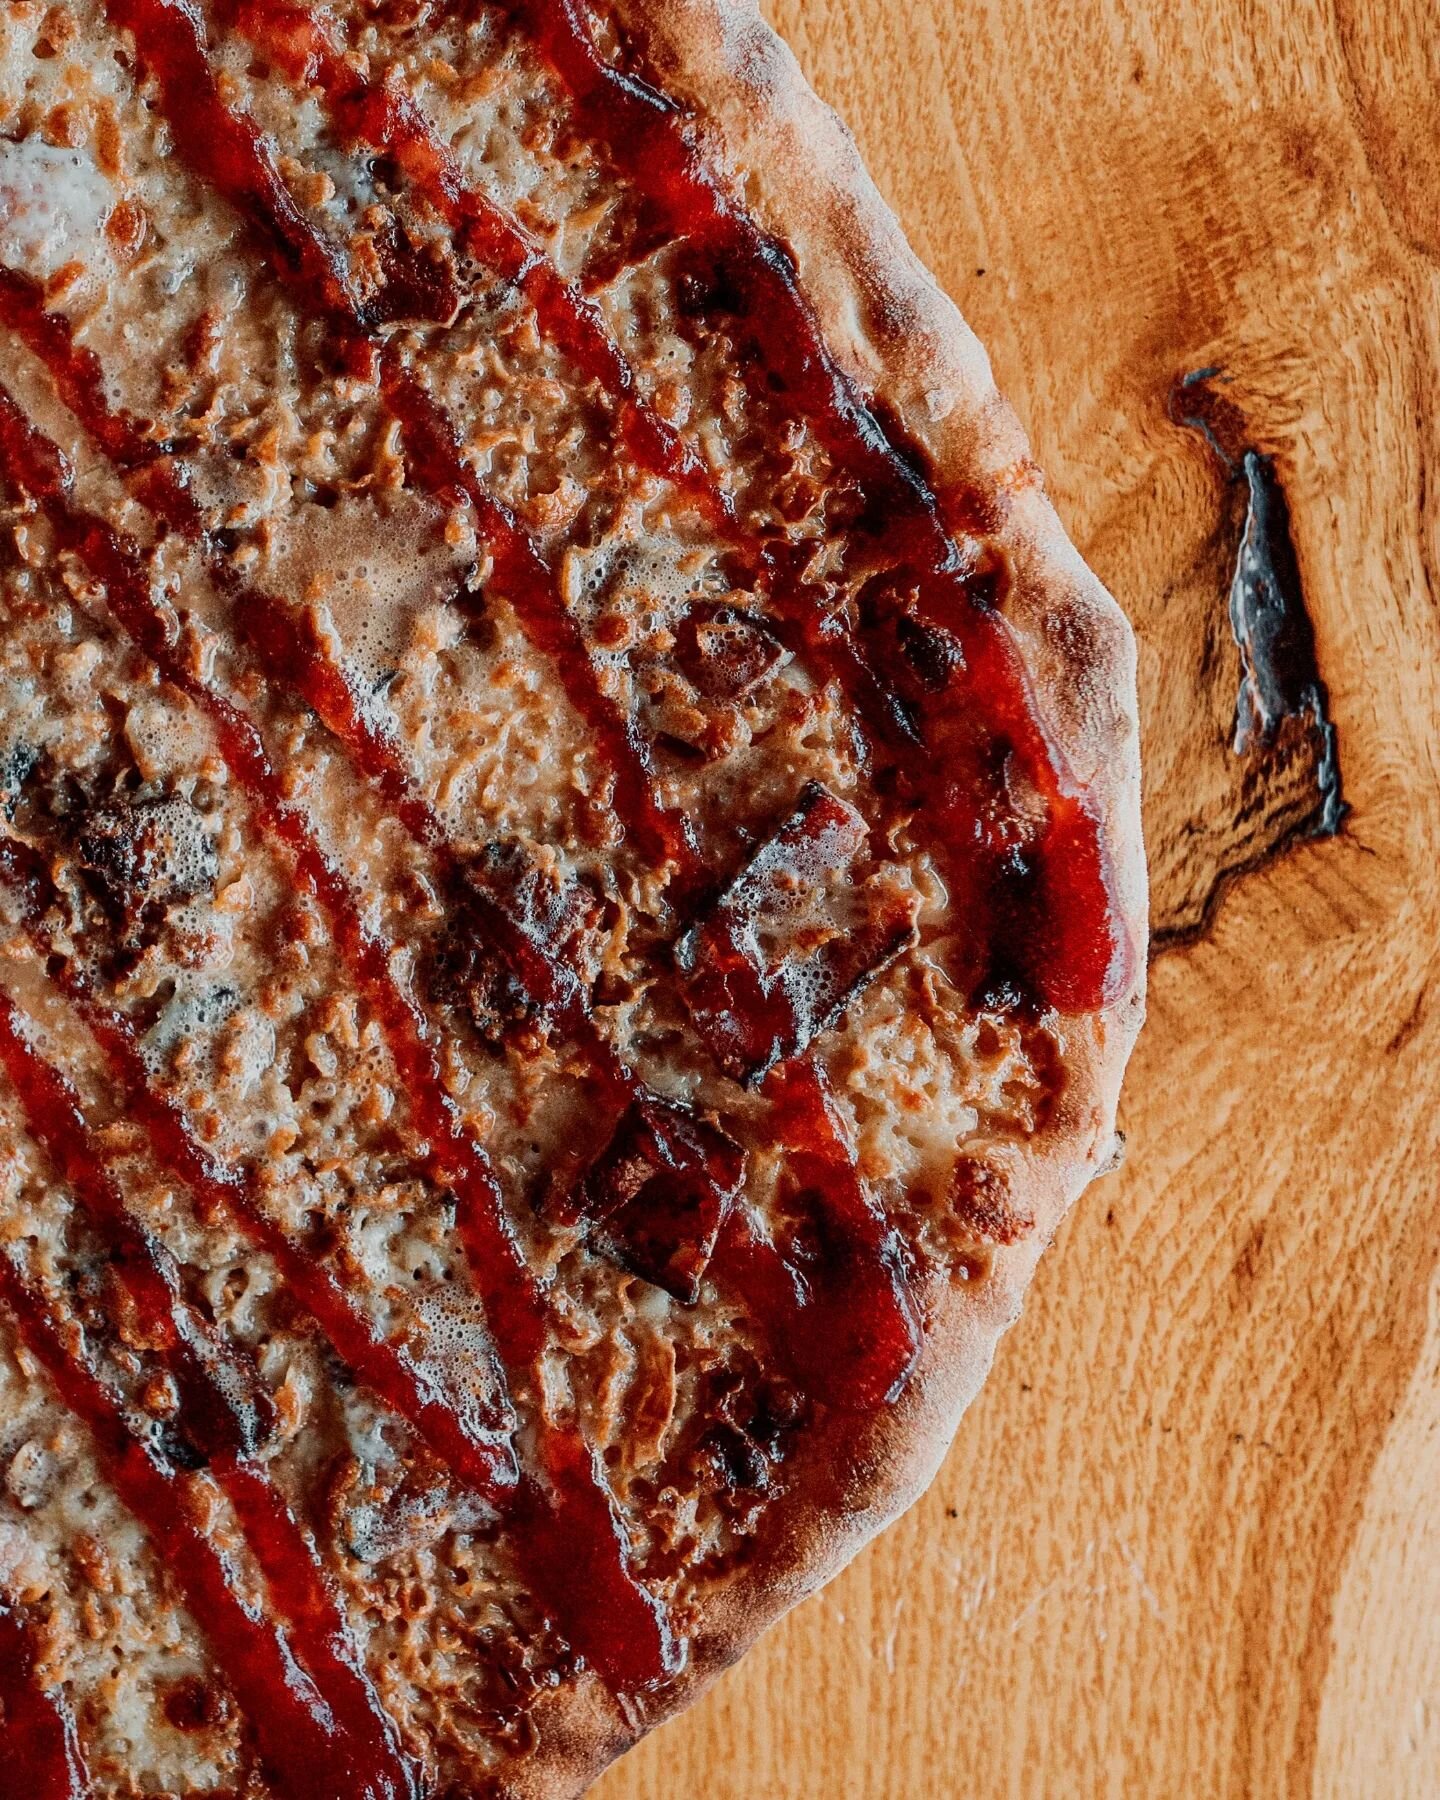 creamy + dreamy 👑 the king
controversial? maybe. delicious? absolutely!
.
.
#newhavenpizza #ctpizza #newhaven 
#pizzagram #ctfood #ctfoodlovers #peanutbutterandjelly #newhaveninsta #newhaveneats #cteatsandsweets #peanutbutterlover #localpizzajoint #